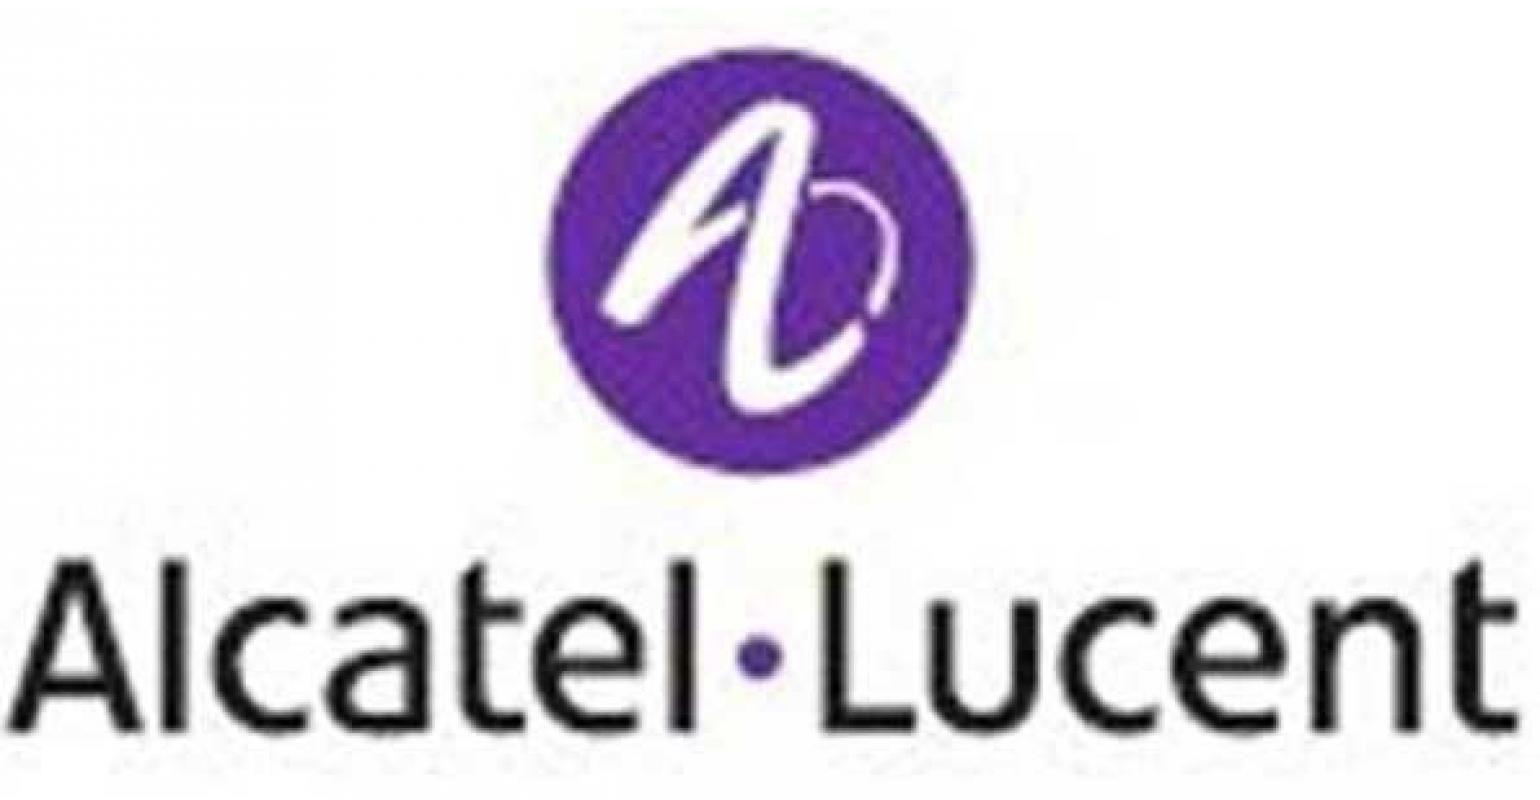 Alcatel-Lucent Logo - Alcatel-Lucent Says Job Cuts to Exceed 5,000 | IndustryWeek